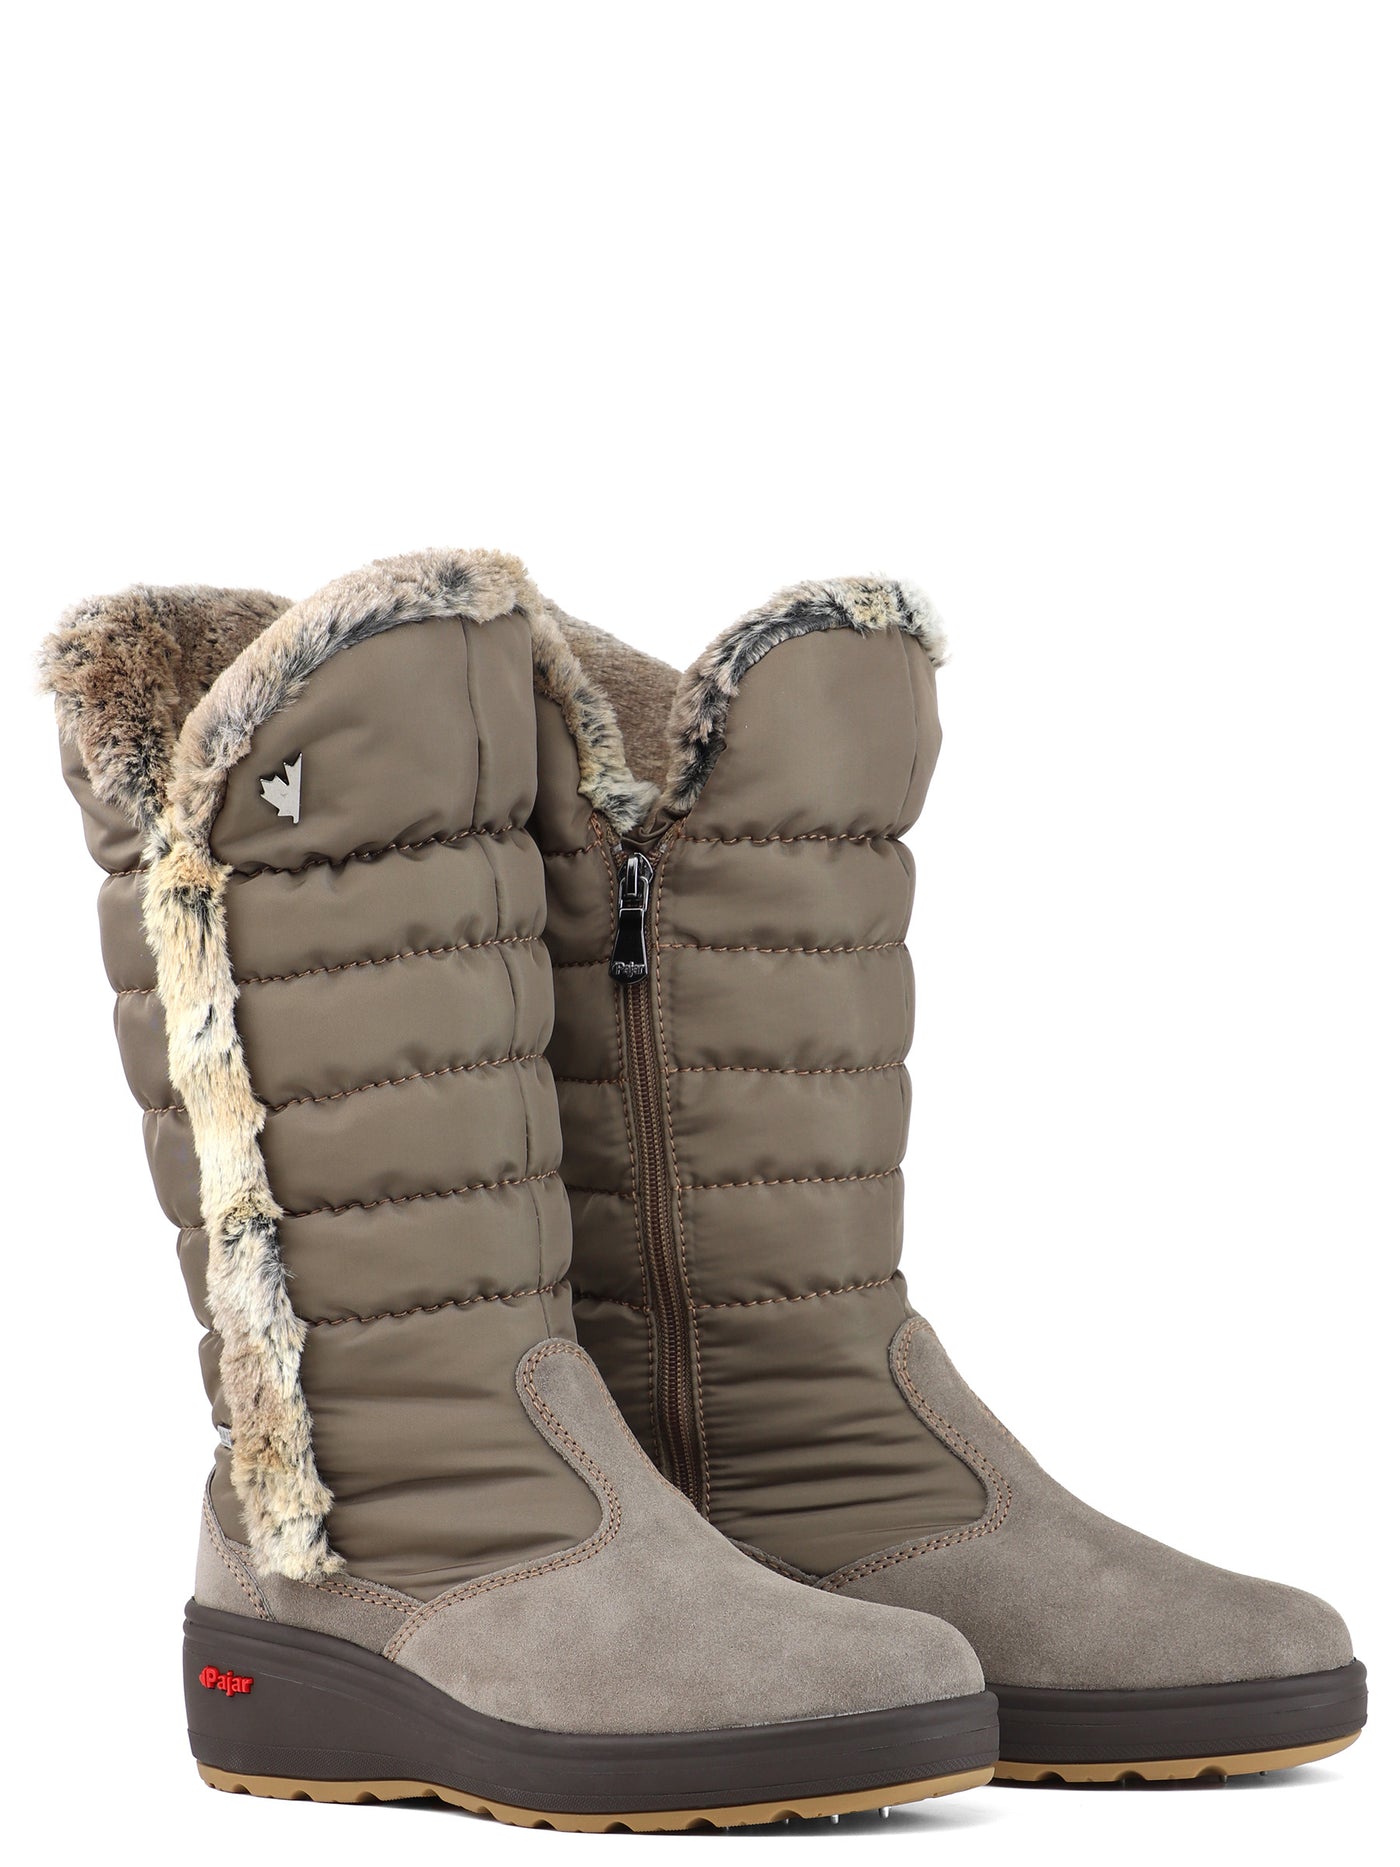 Sira Women's Boot w/ Ice Grippers